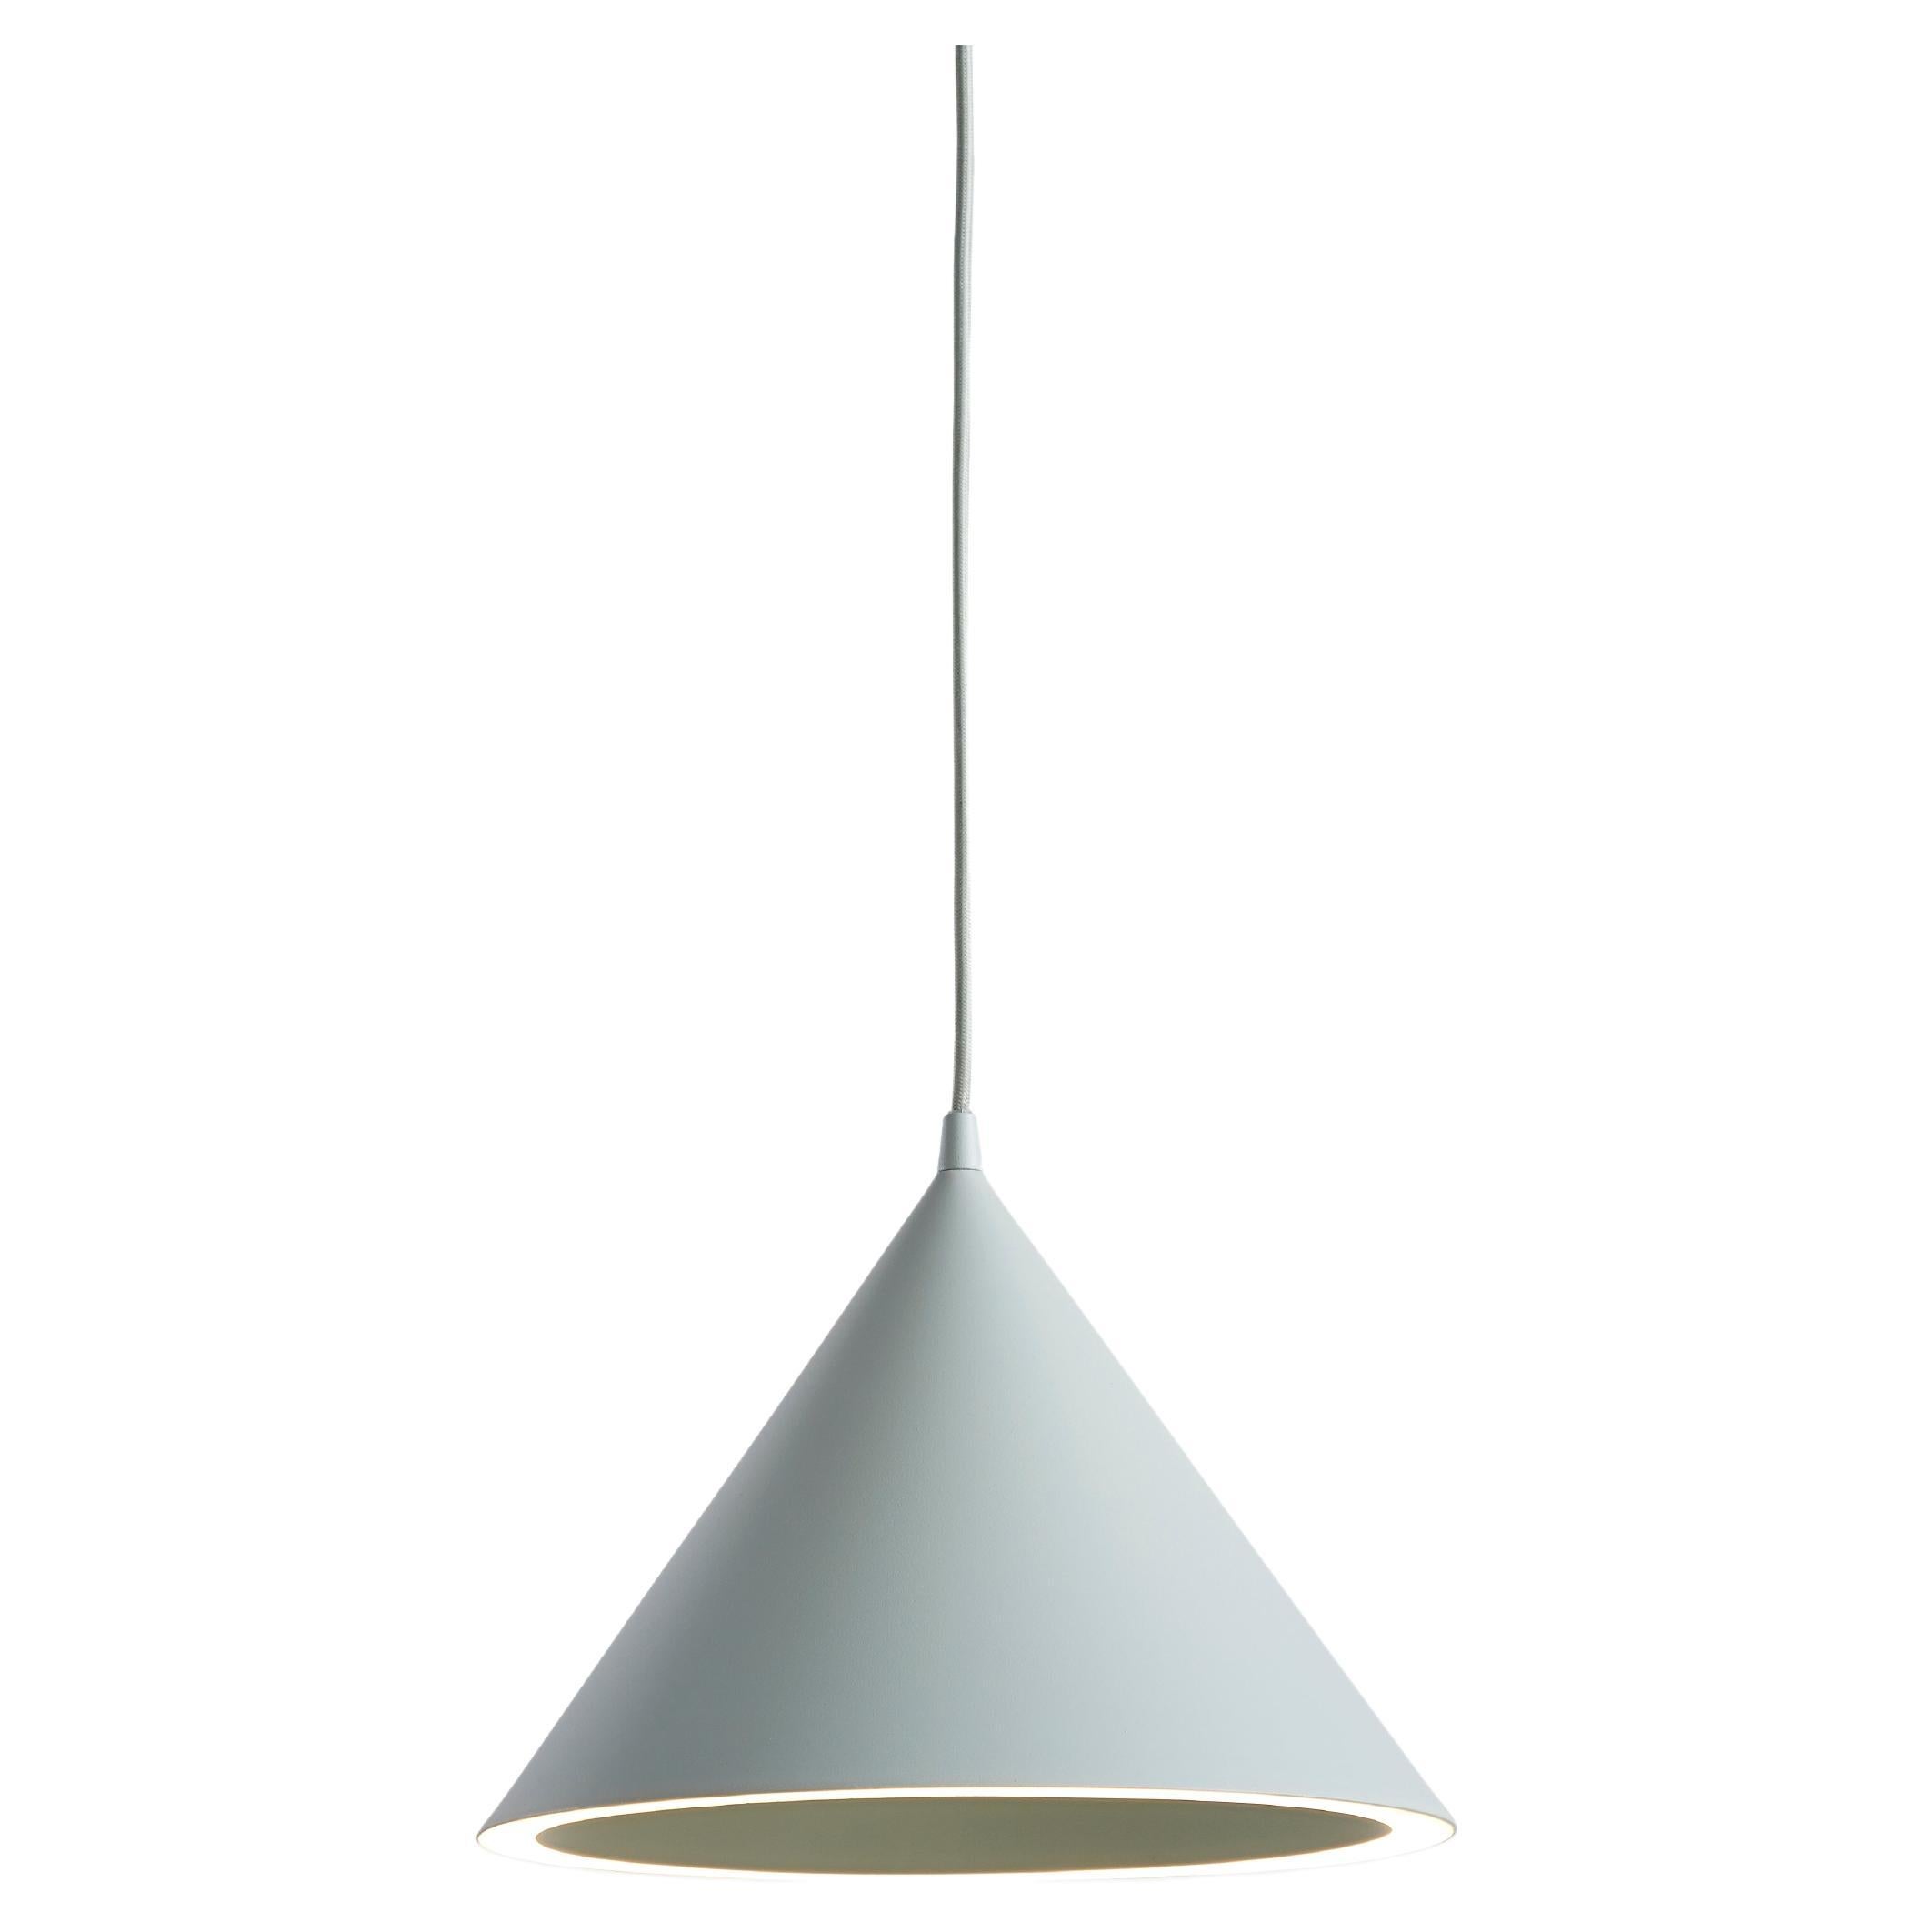 Small Mint Annular Pendant Lamp by MSDS Studio For Sale